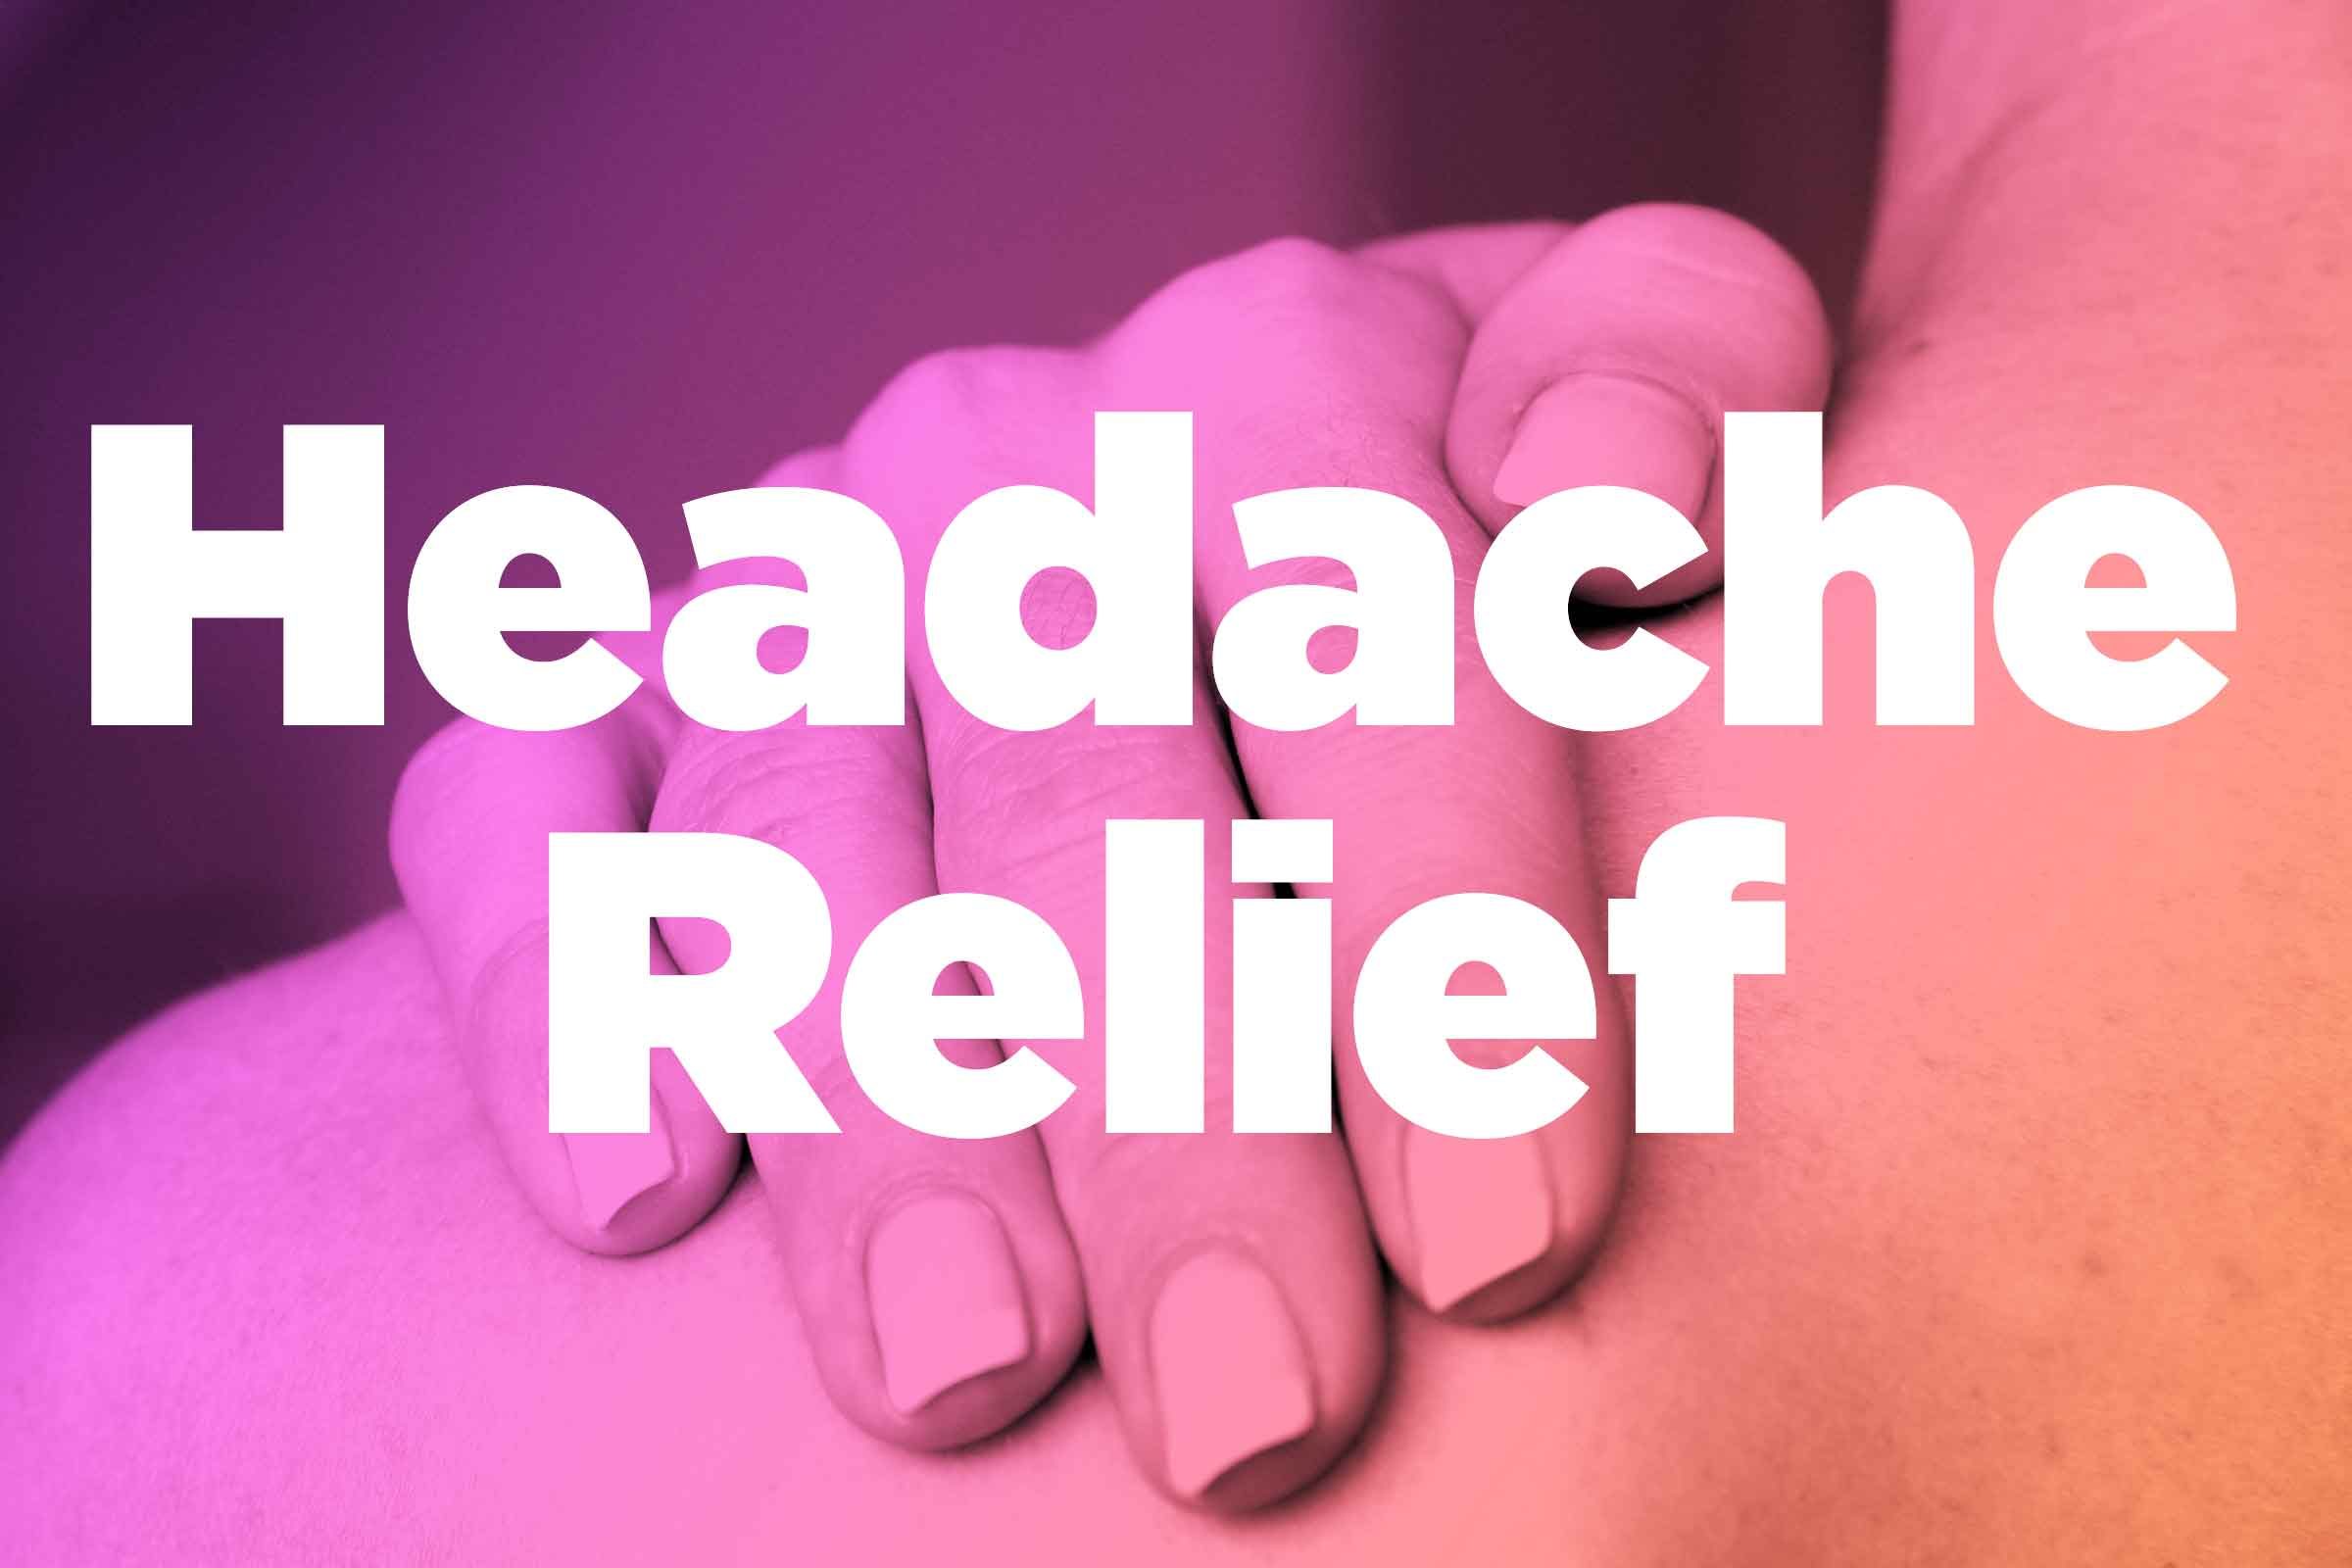 How to Get Rid of Your Headache with Self-Massage